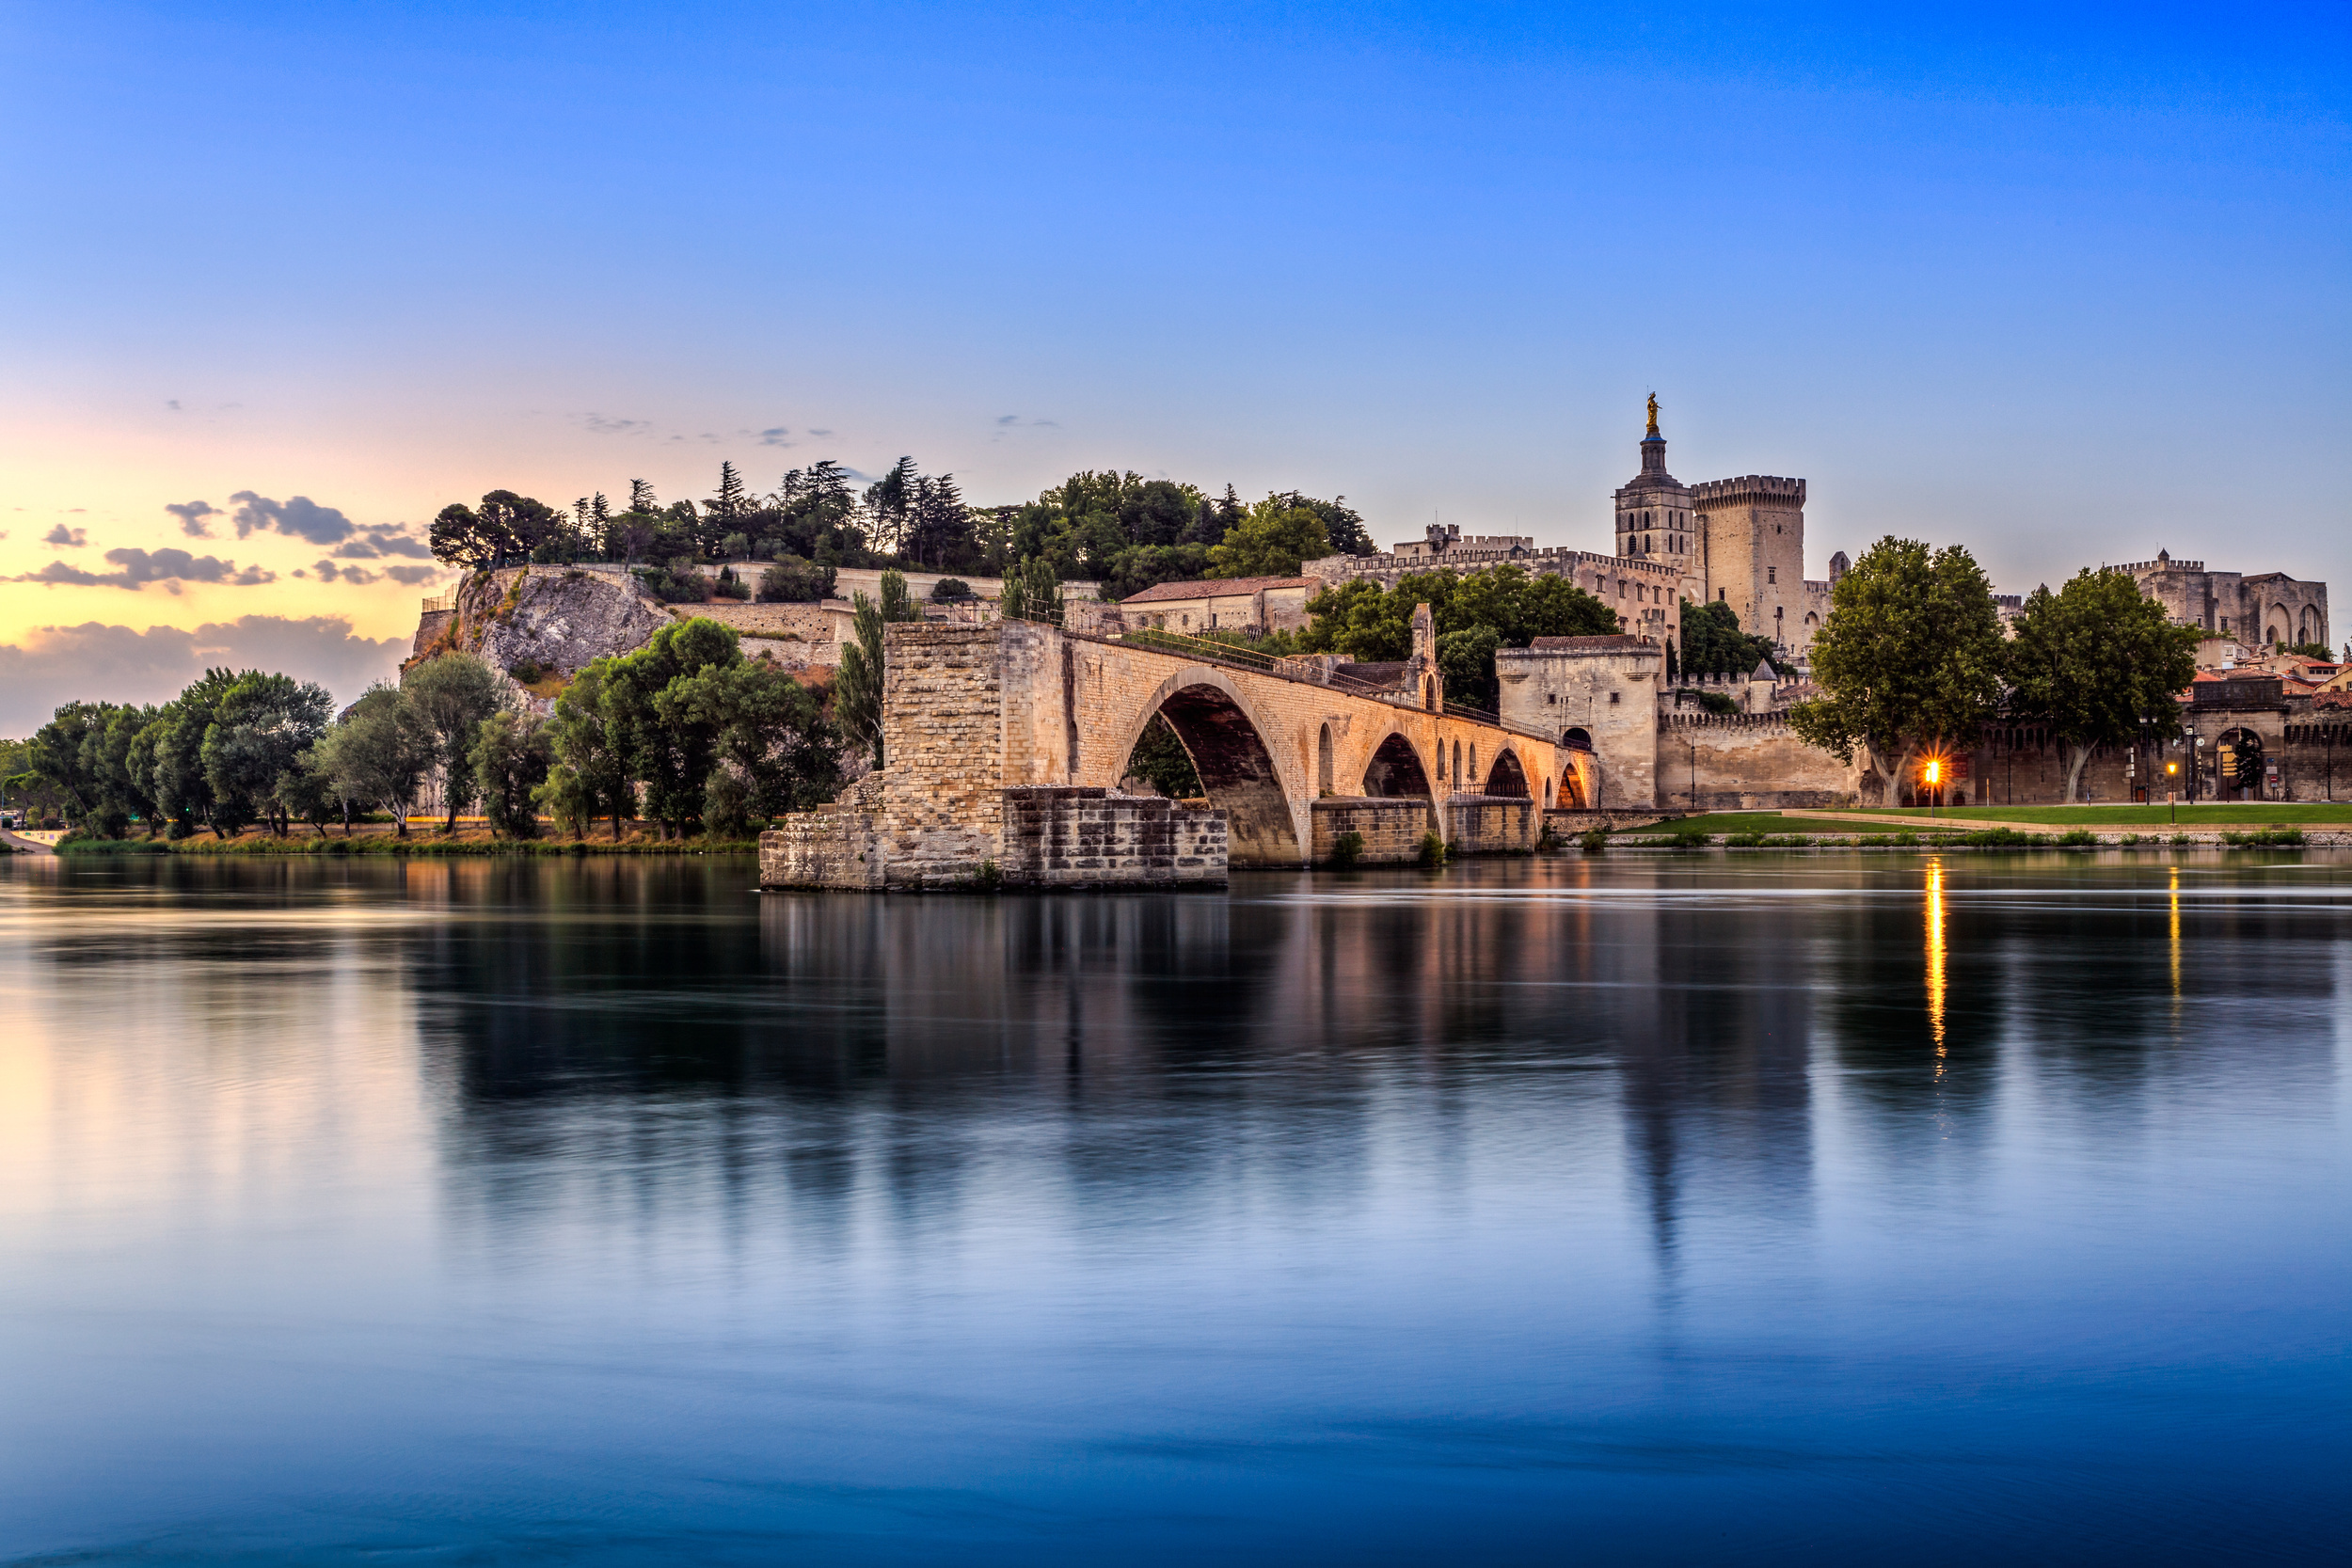 <p>Avignon is a beautiful town between Lyon and Marseille and a great base for exploring Provence. Most famous for being the one-time residence of the Pope, back in the 14th century when Rome was undergoing a lot of turmoil, the former Palais du Pope is a must-see.</p><p>You may also like: <a href='https://www.yardbarker.com/lifestyle/articles/23_foods_that_make_us_nostalgic_for_the_90s_031324/s1__39034591'>23 foods that make us nostalgic for the ‘90s</a></p>